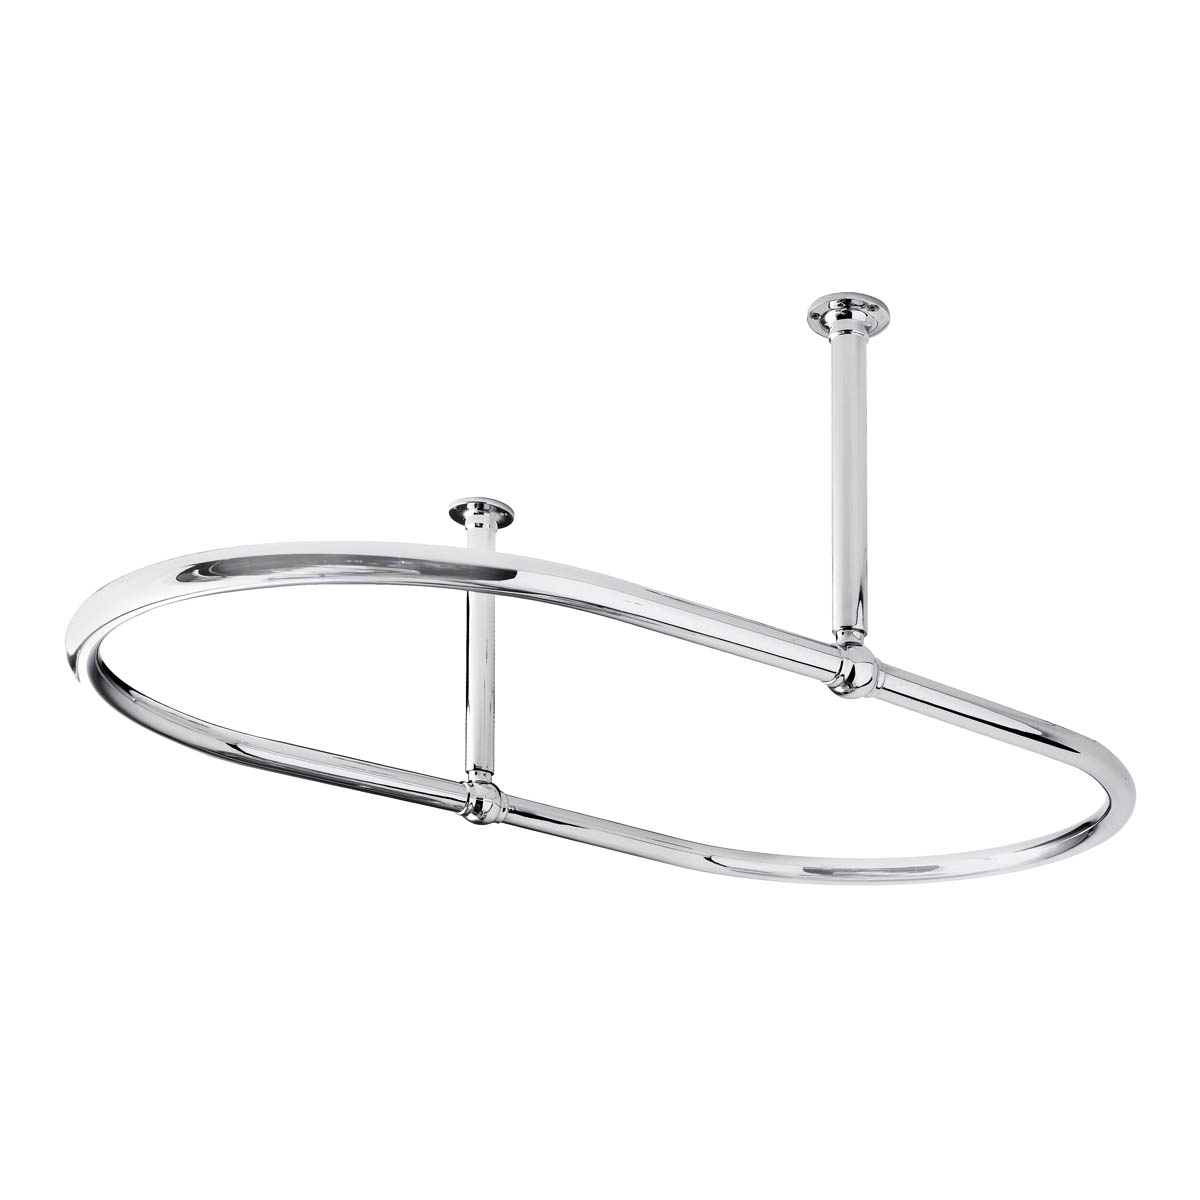 Hudson Reed Oval Shower Ring for Shower Curtain - Chrome 1092x683mm (18512)